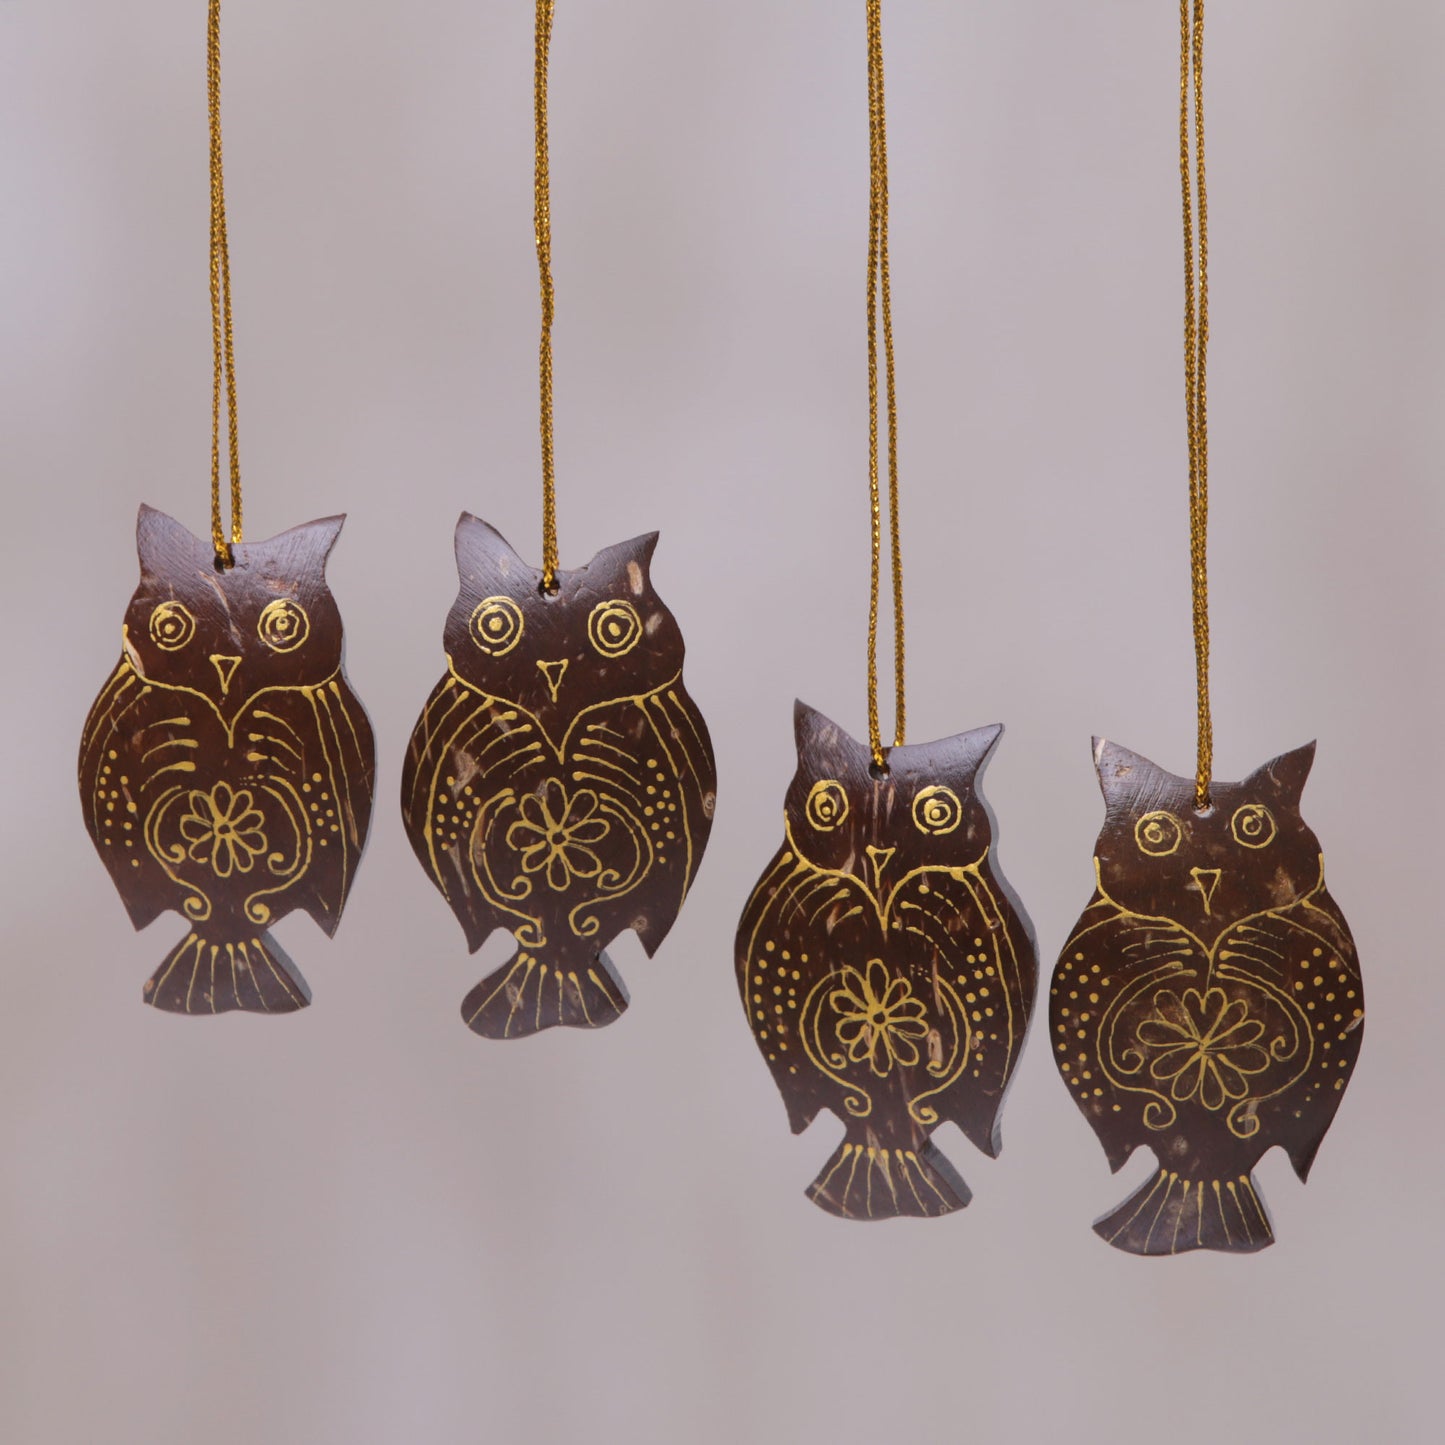 Holiday Owl Coconut Shell Hanging Ornaments - Set of 4